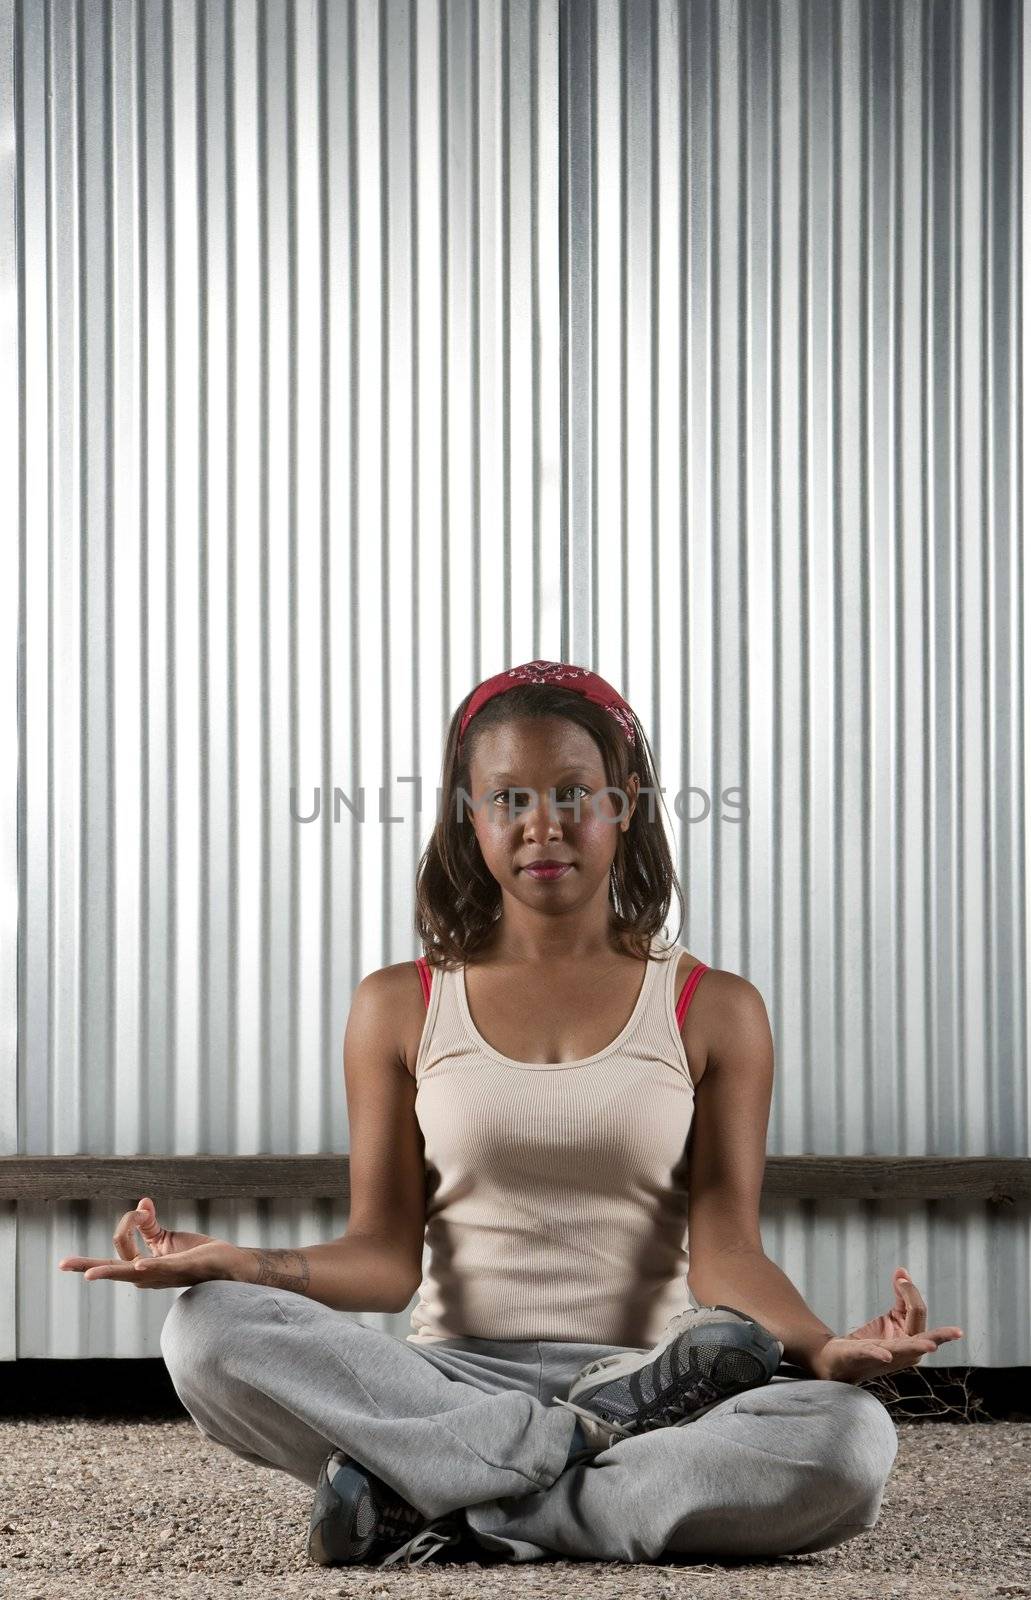 African-American woman meditating in front of corrugated metal